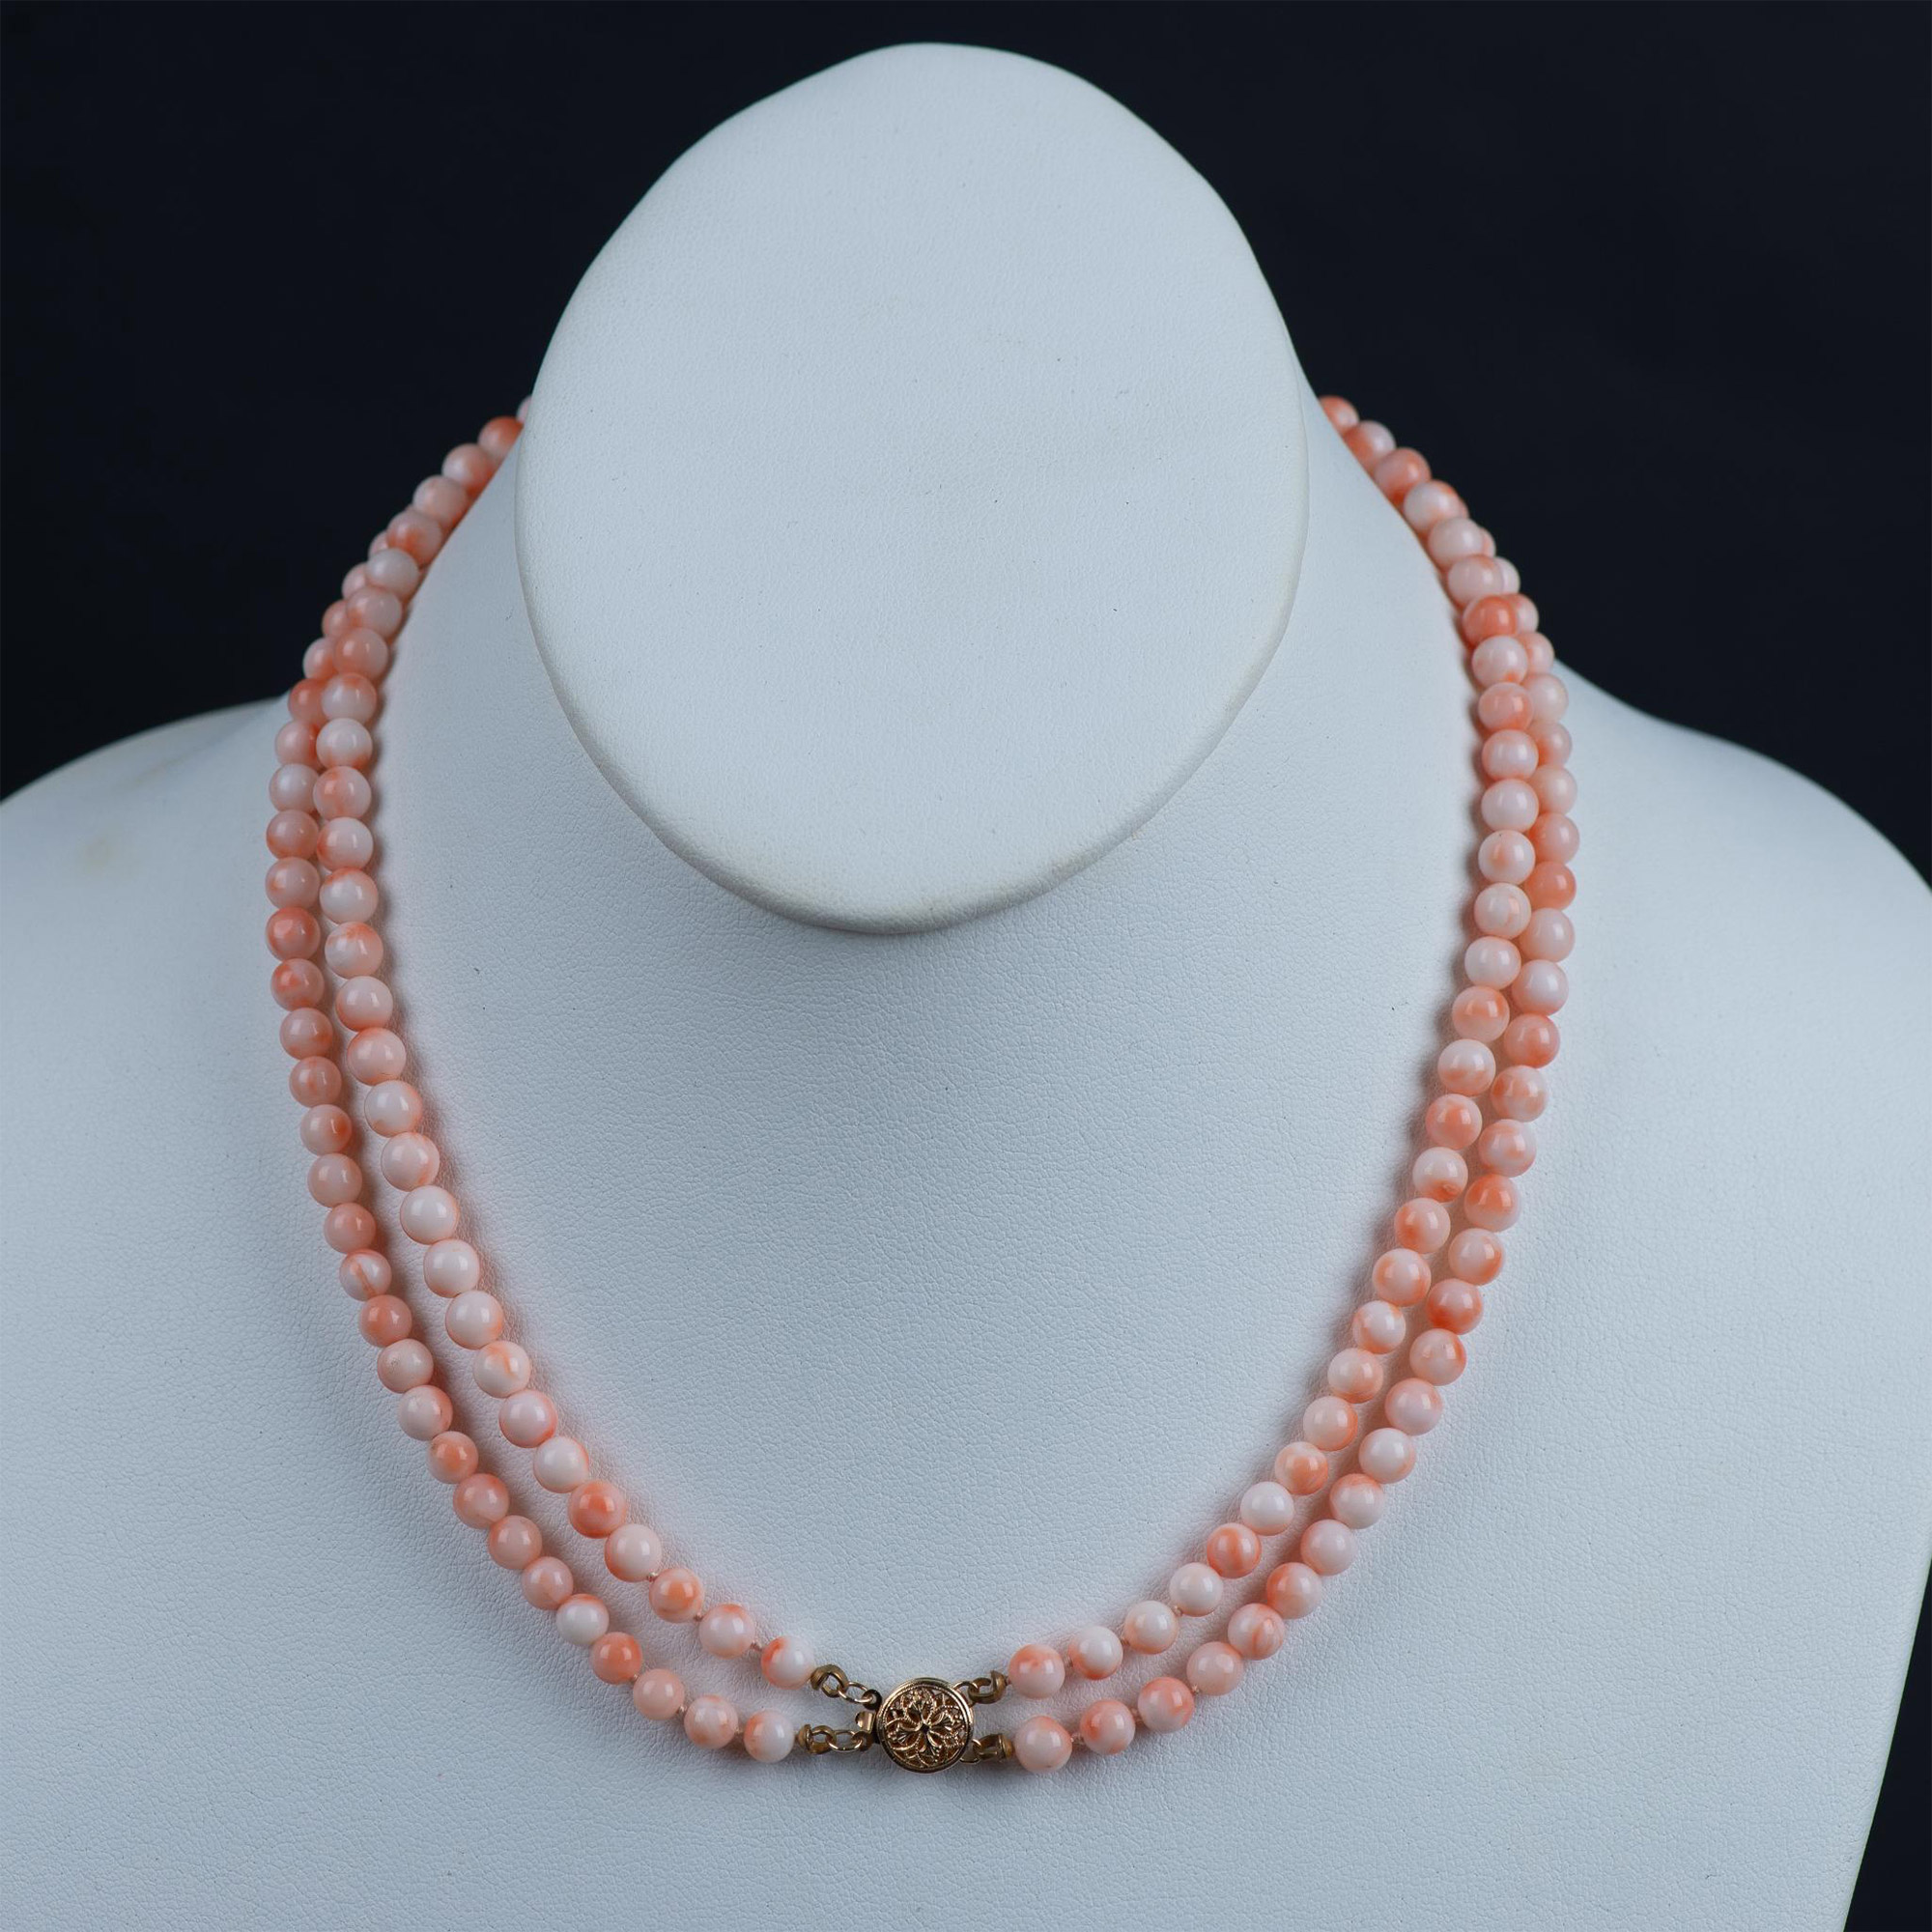 Beautiful 14K Gold Double Strand Coral Bead Necklace - Image 2 of 3